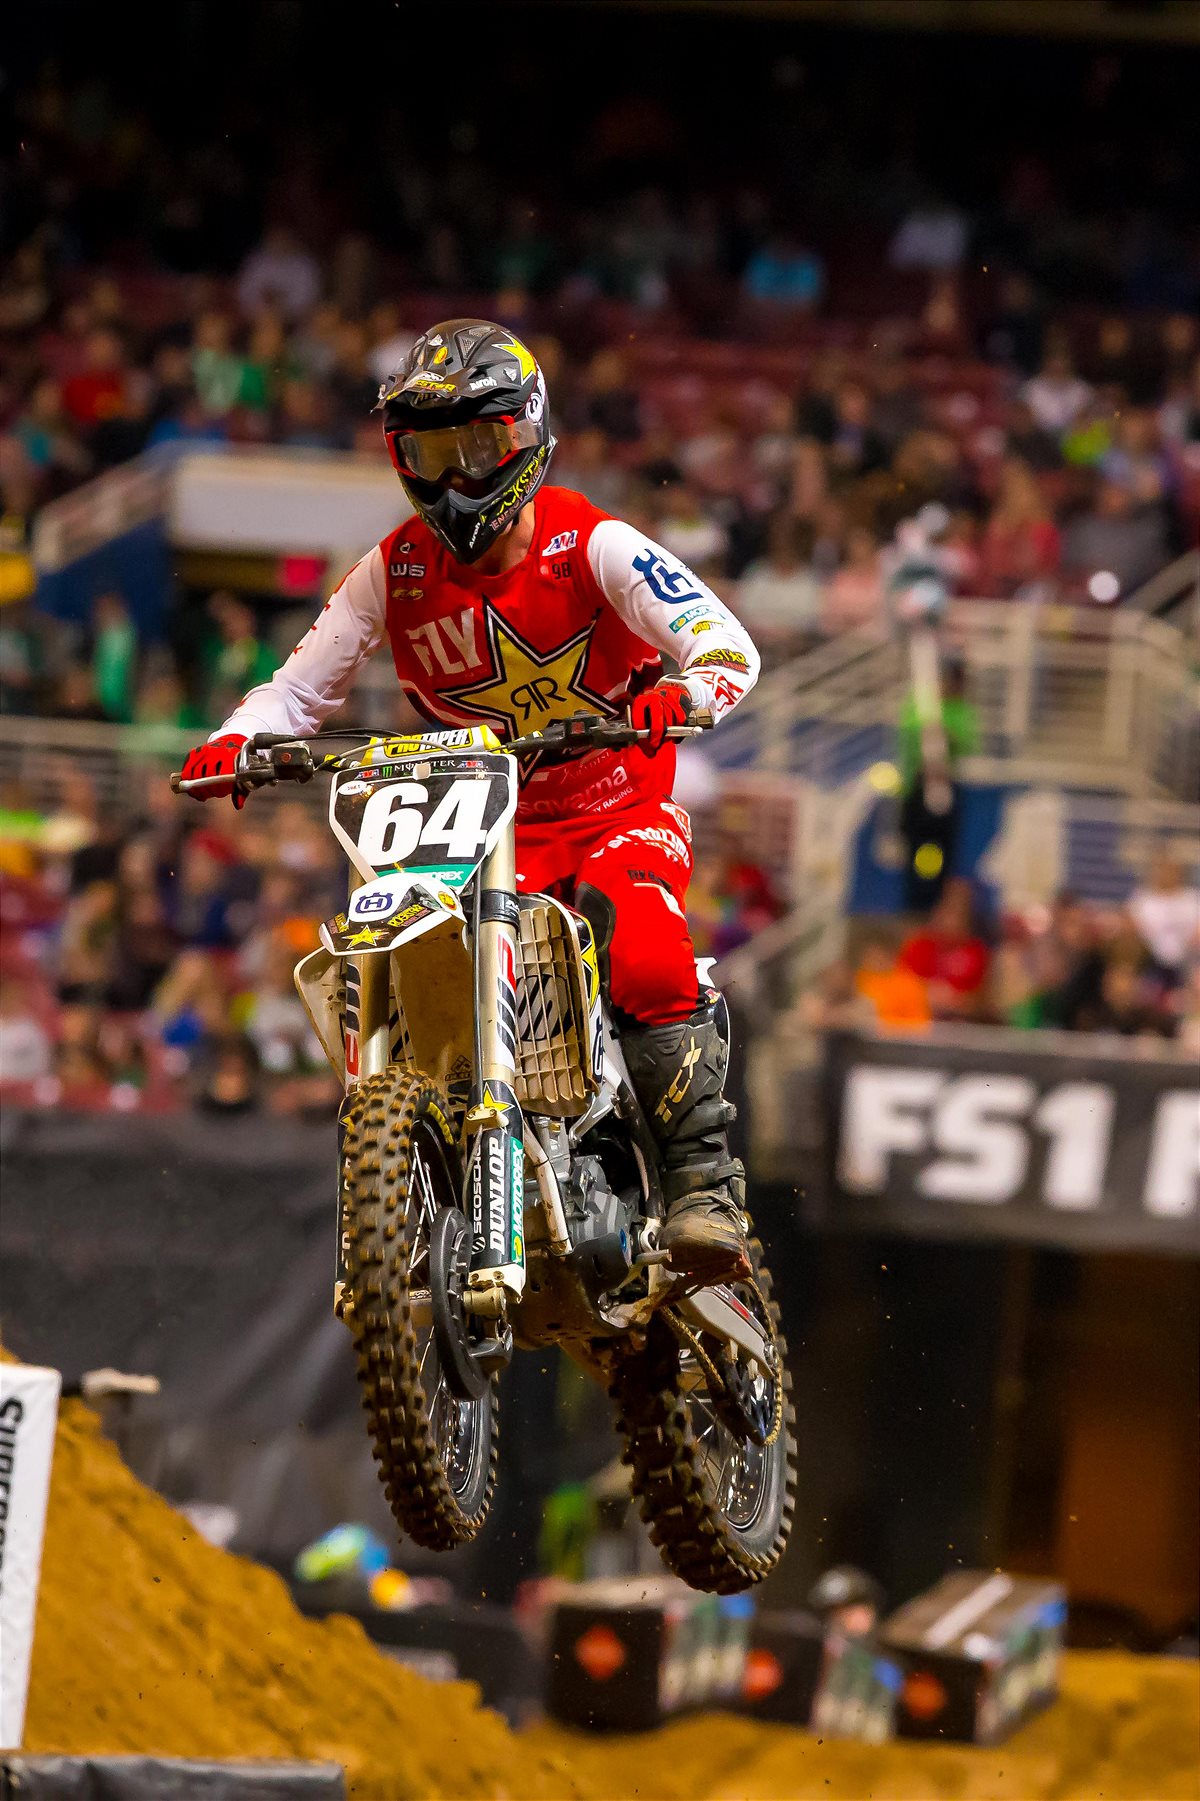 Michael Mosiman earned his first top-10 Supercross finish on Saturday in St. Louis! (Photo: Simon Cudby)